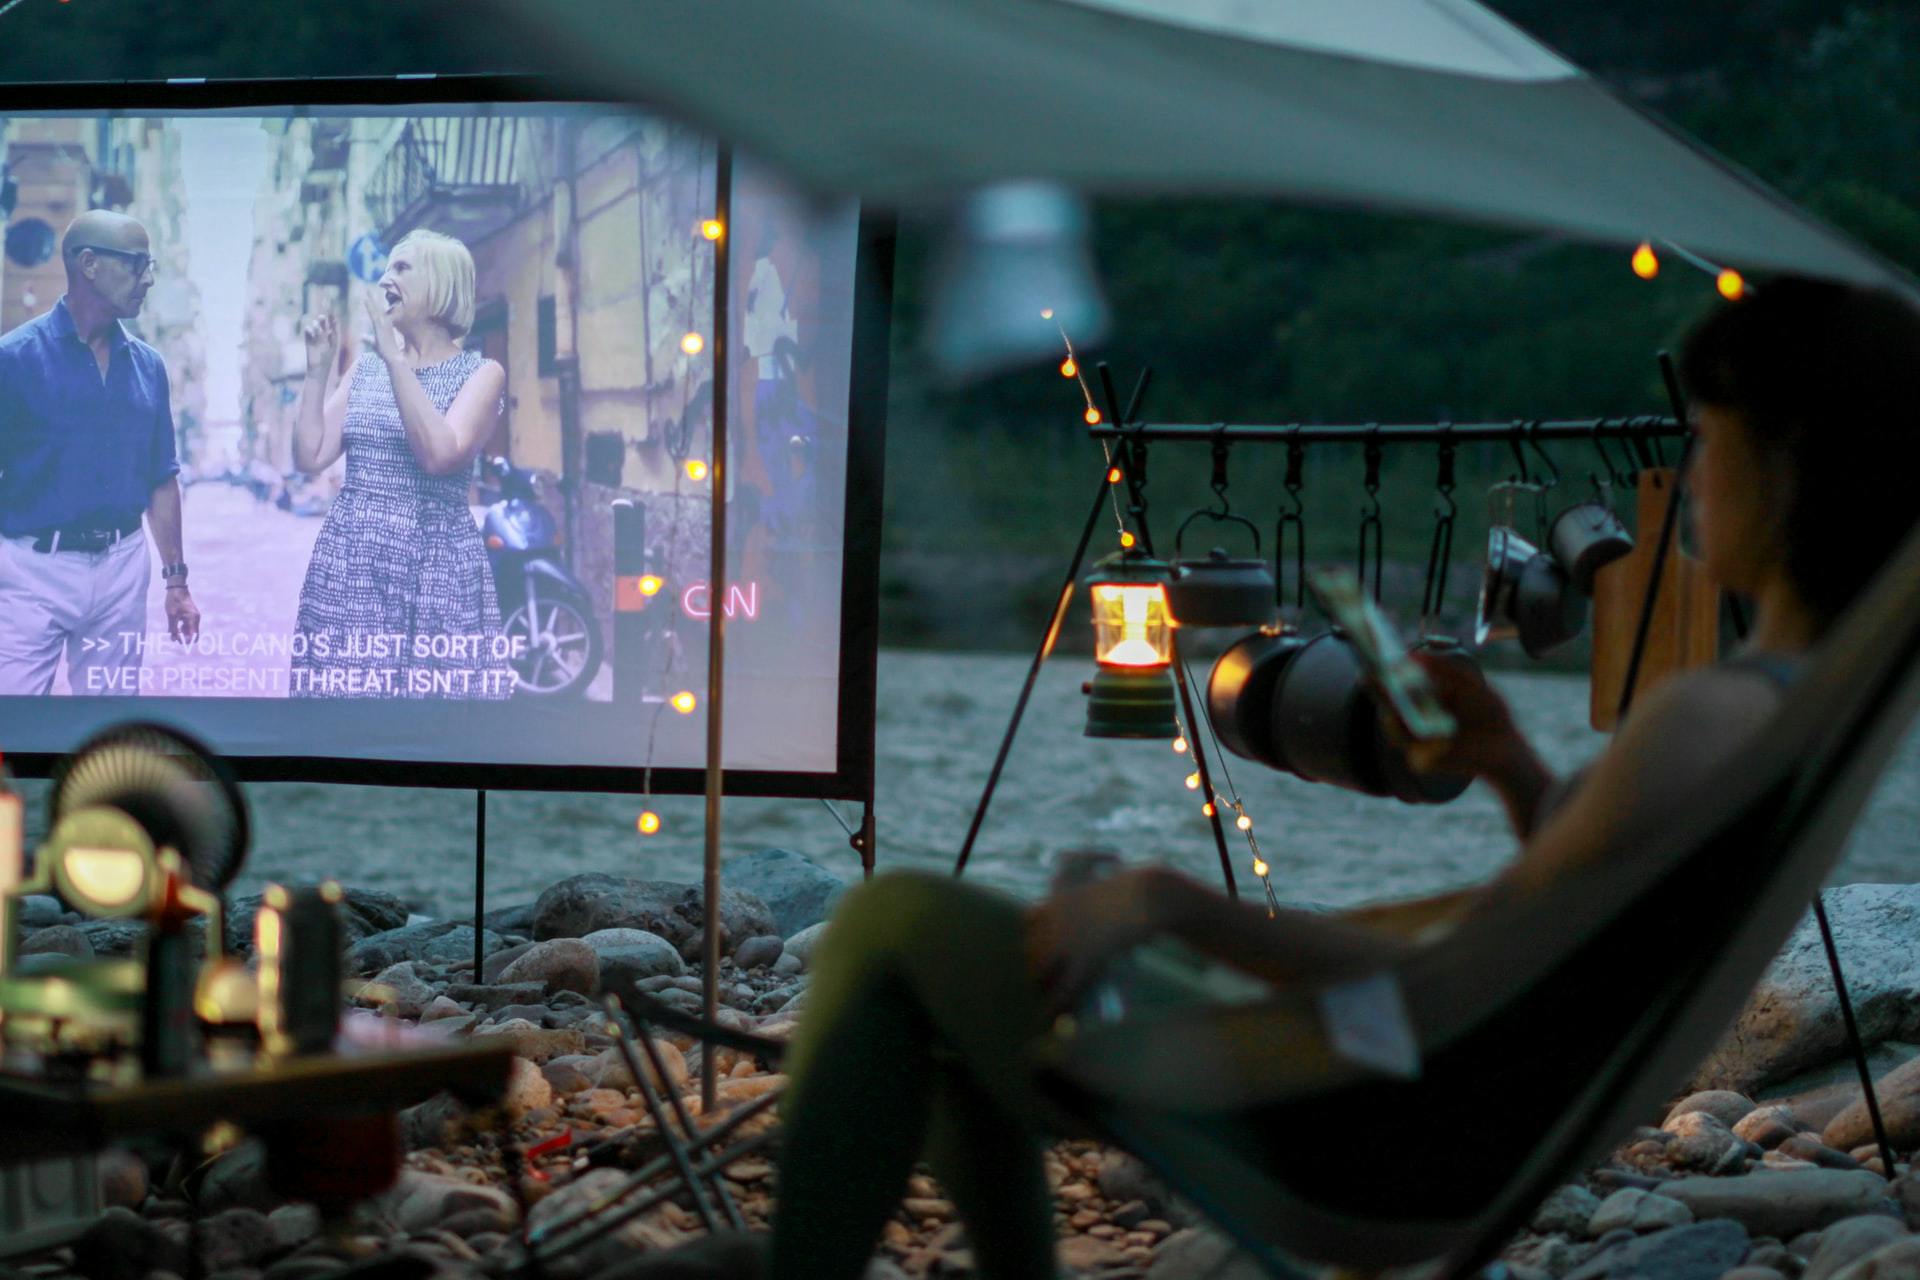 A person sits in a camp chair outside with a projector on a screen. There are lights and blankets around.